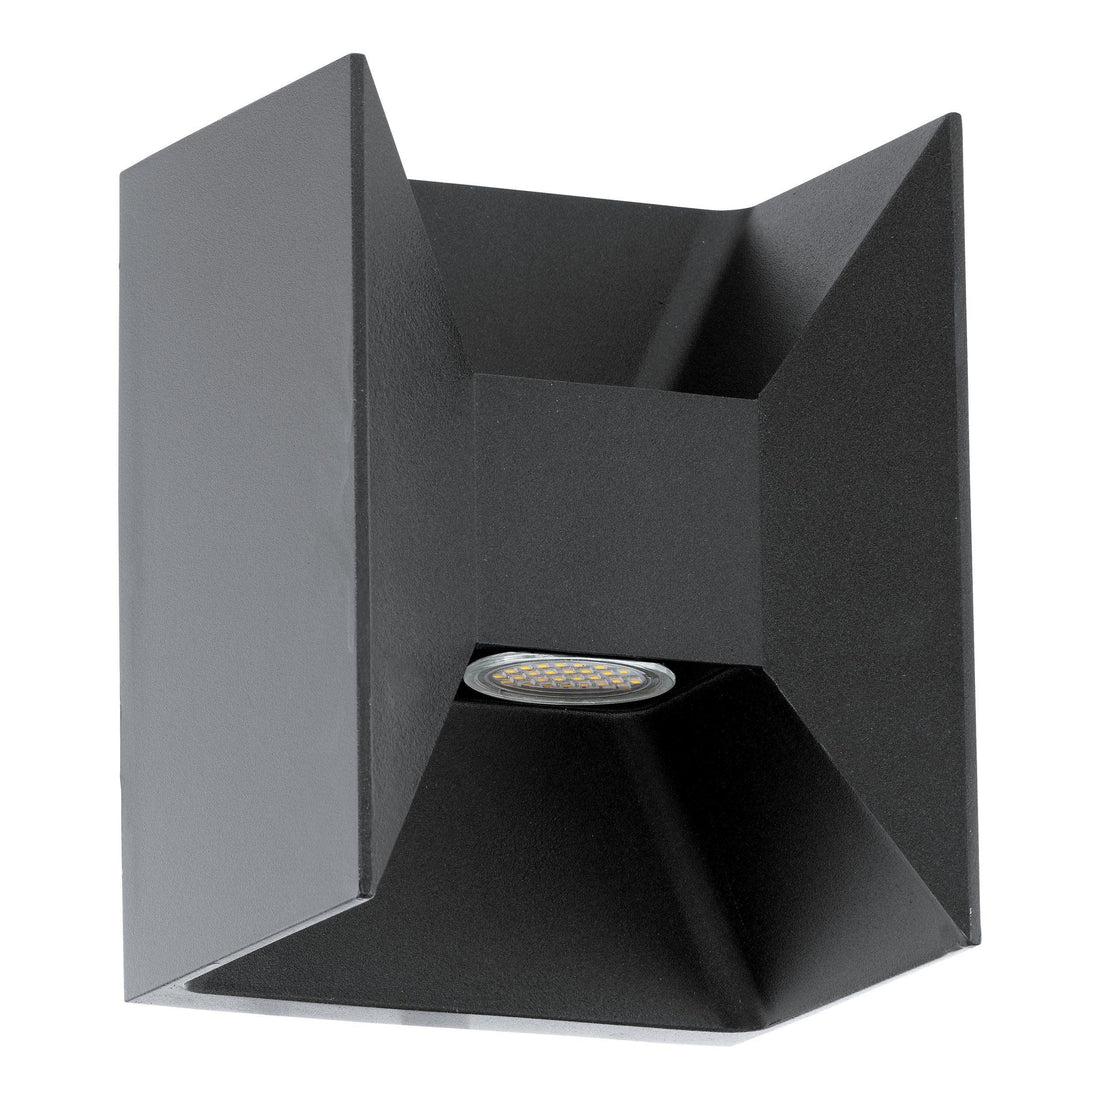 MORINO Outdoor Wall Light by The Light Library